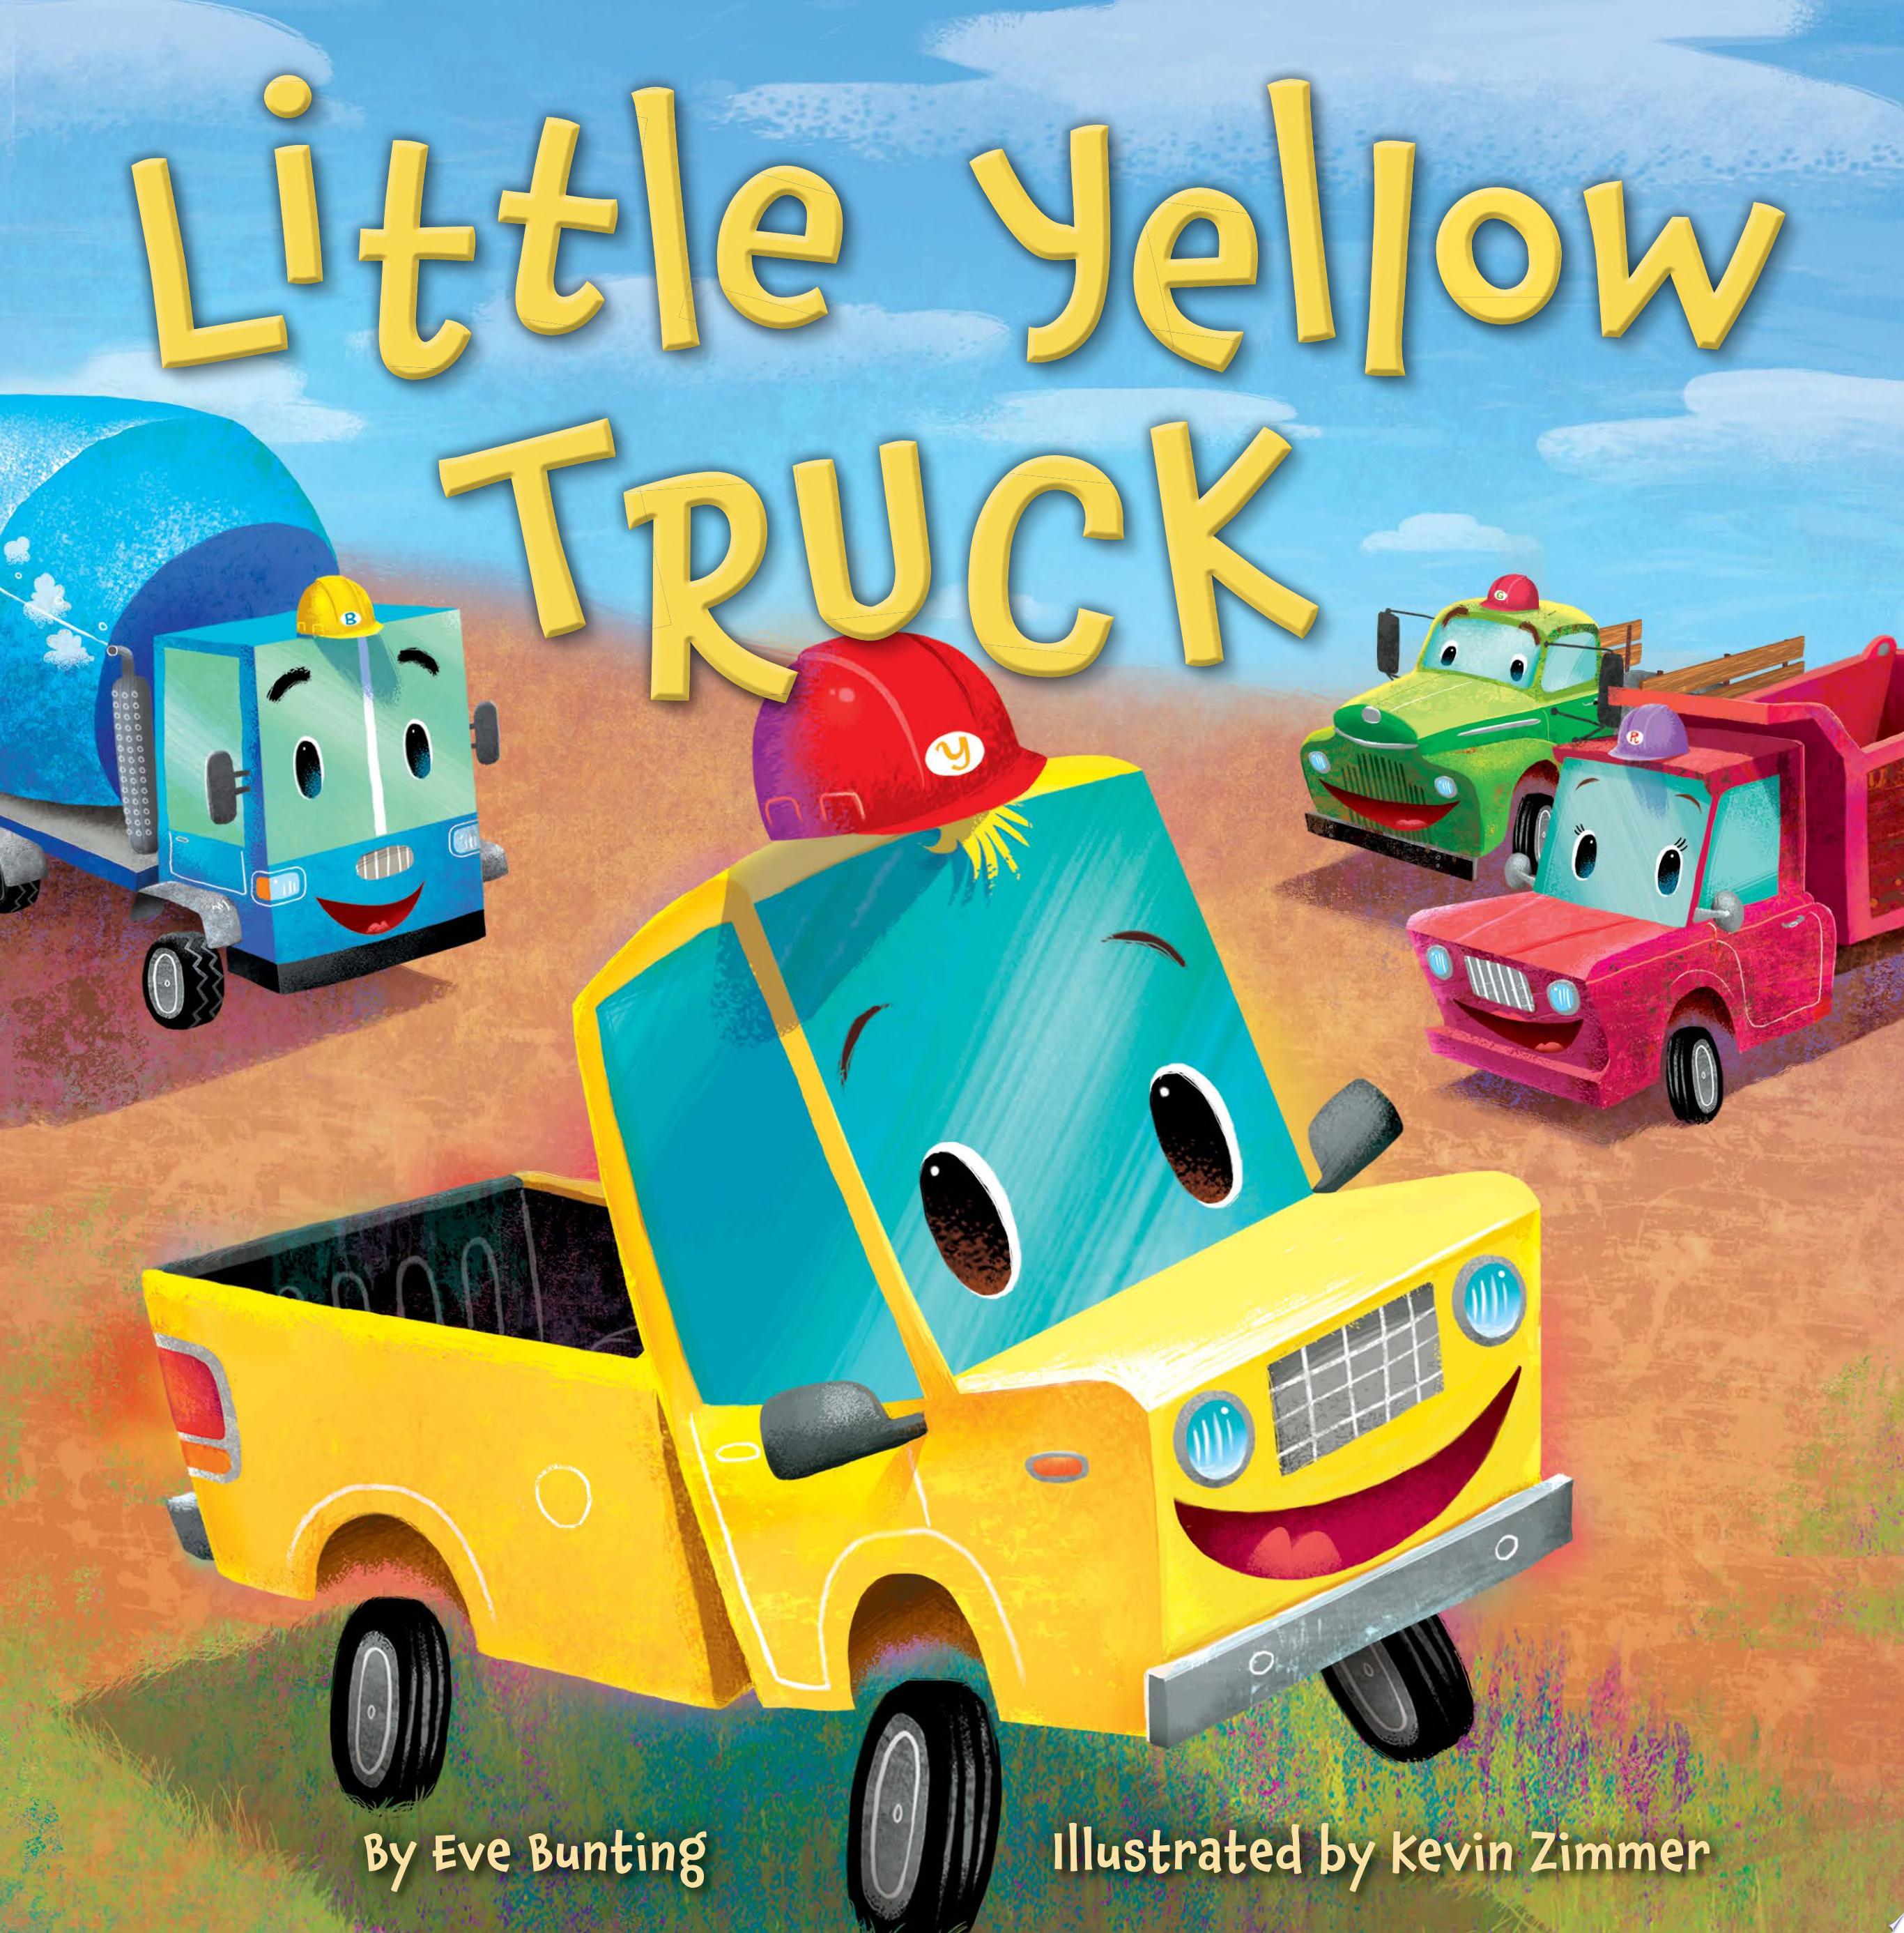 Image for "Little Yellow Truck"